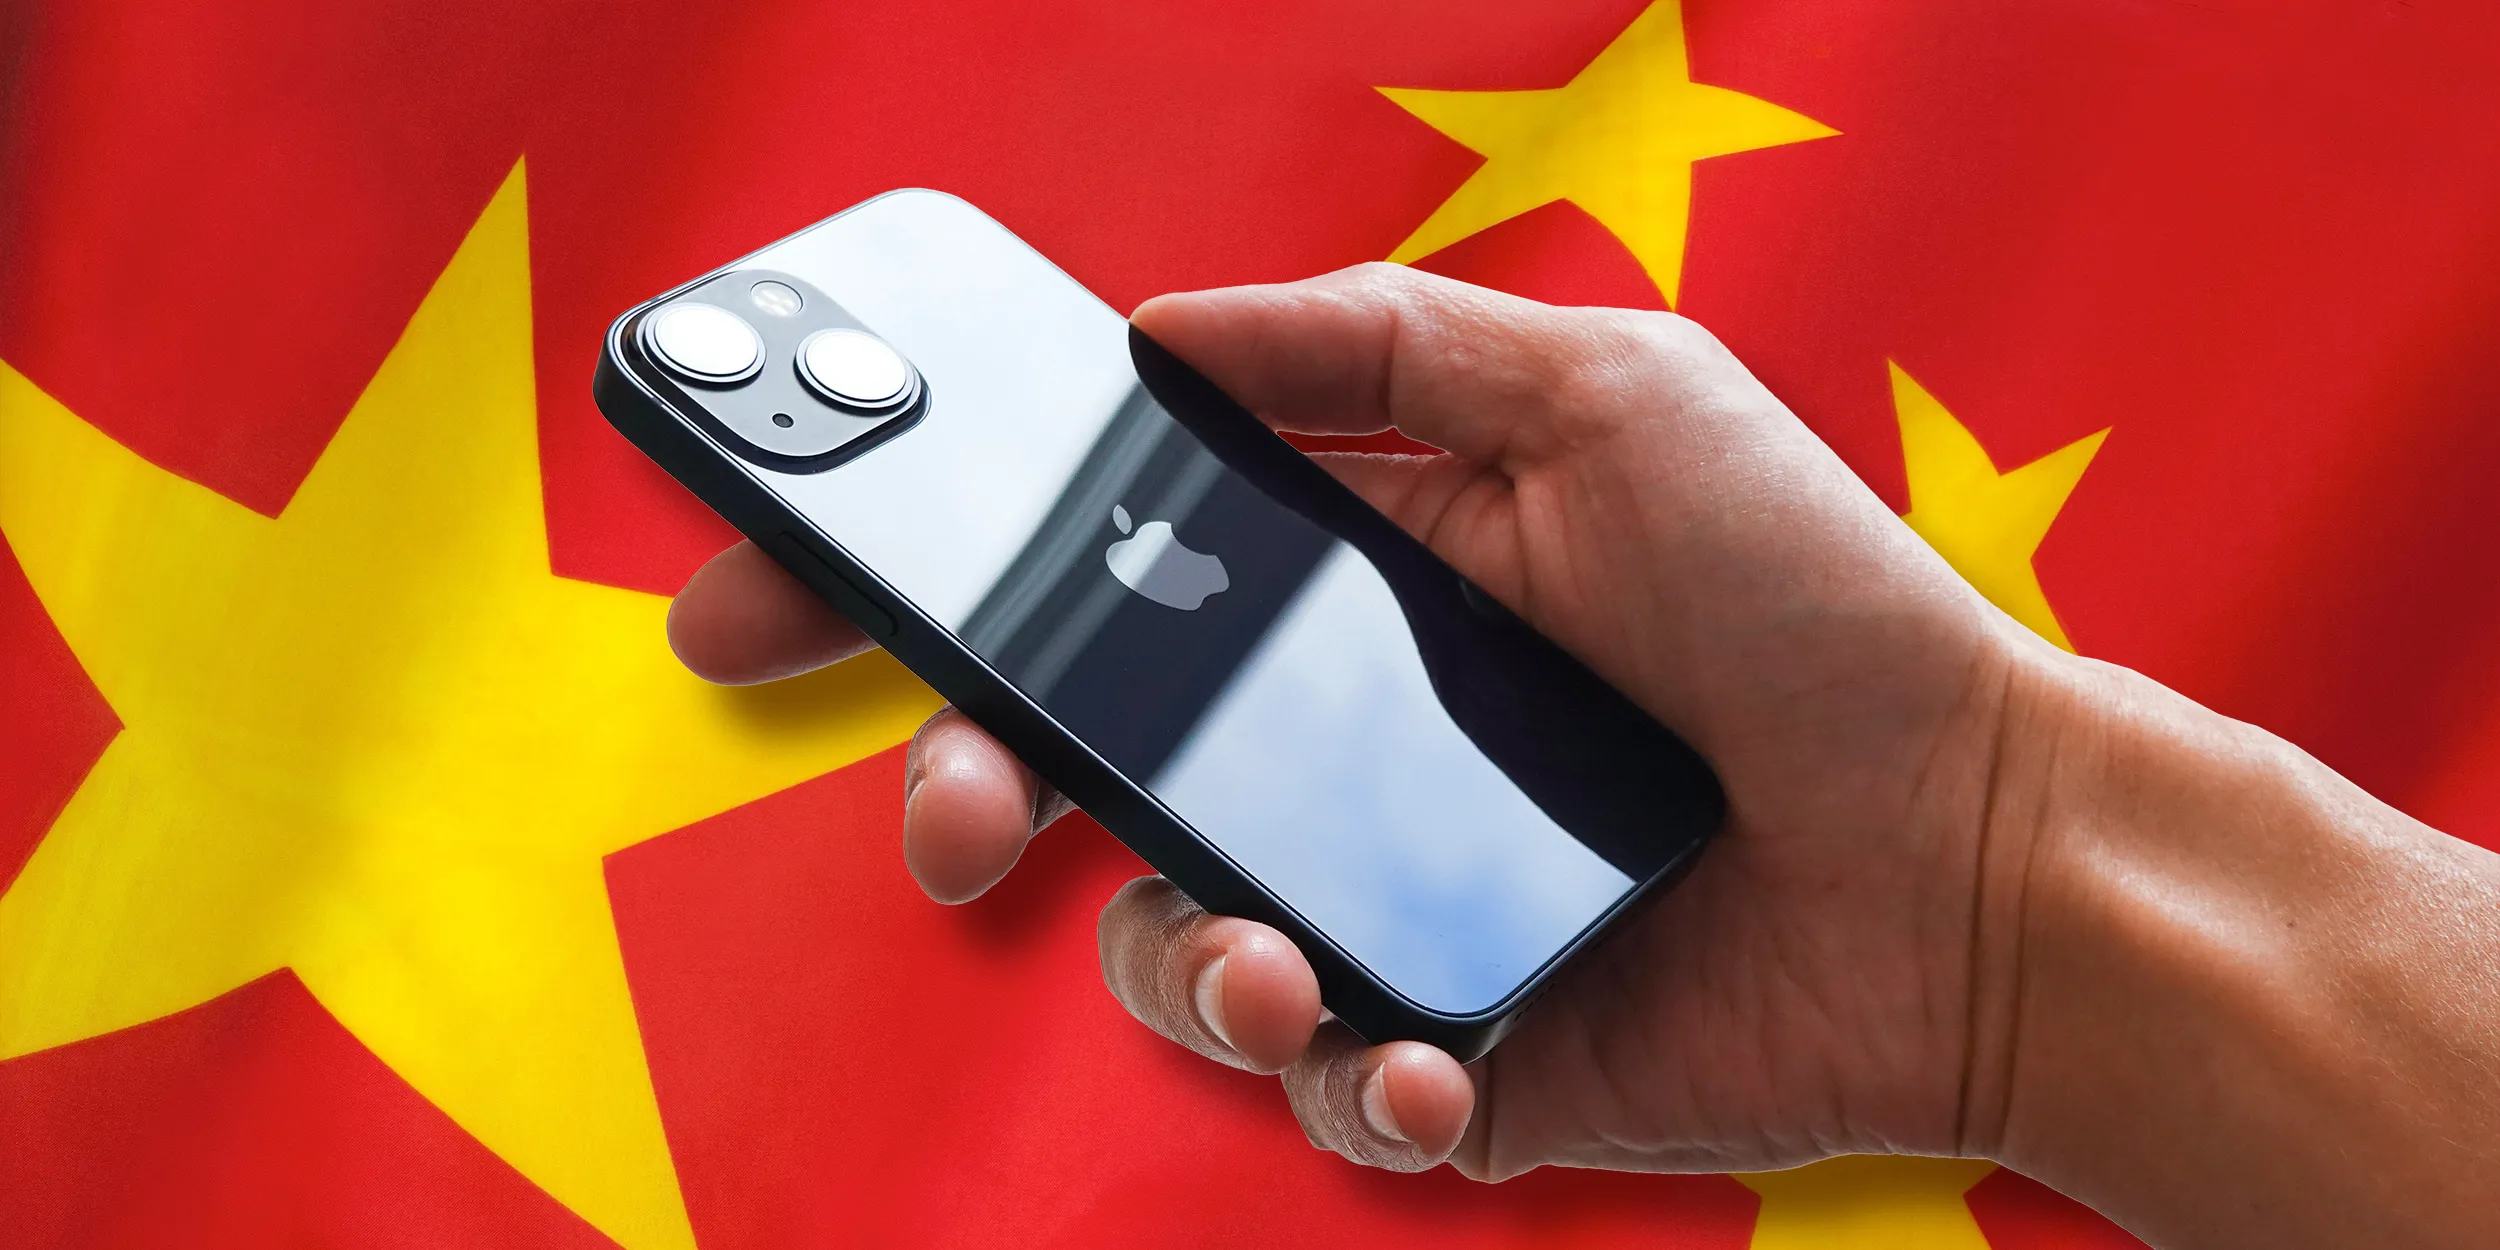 China bans government officials from using iPhones